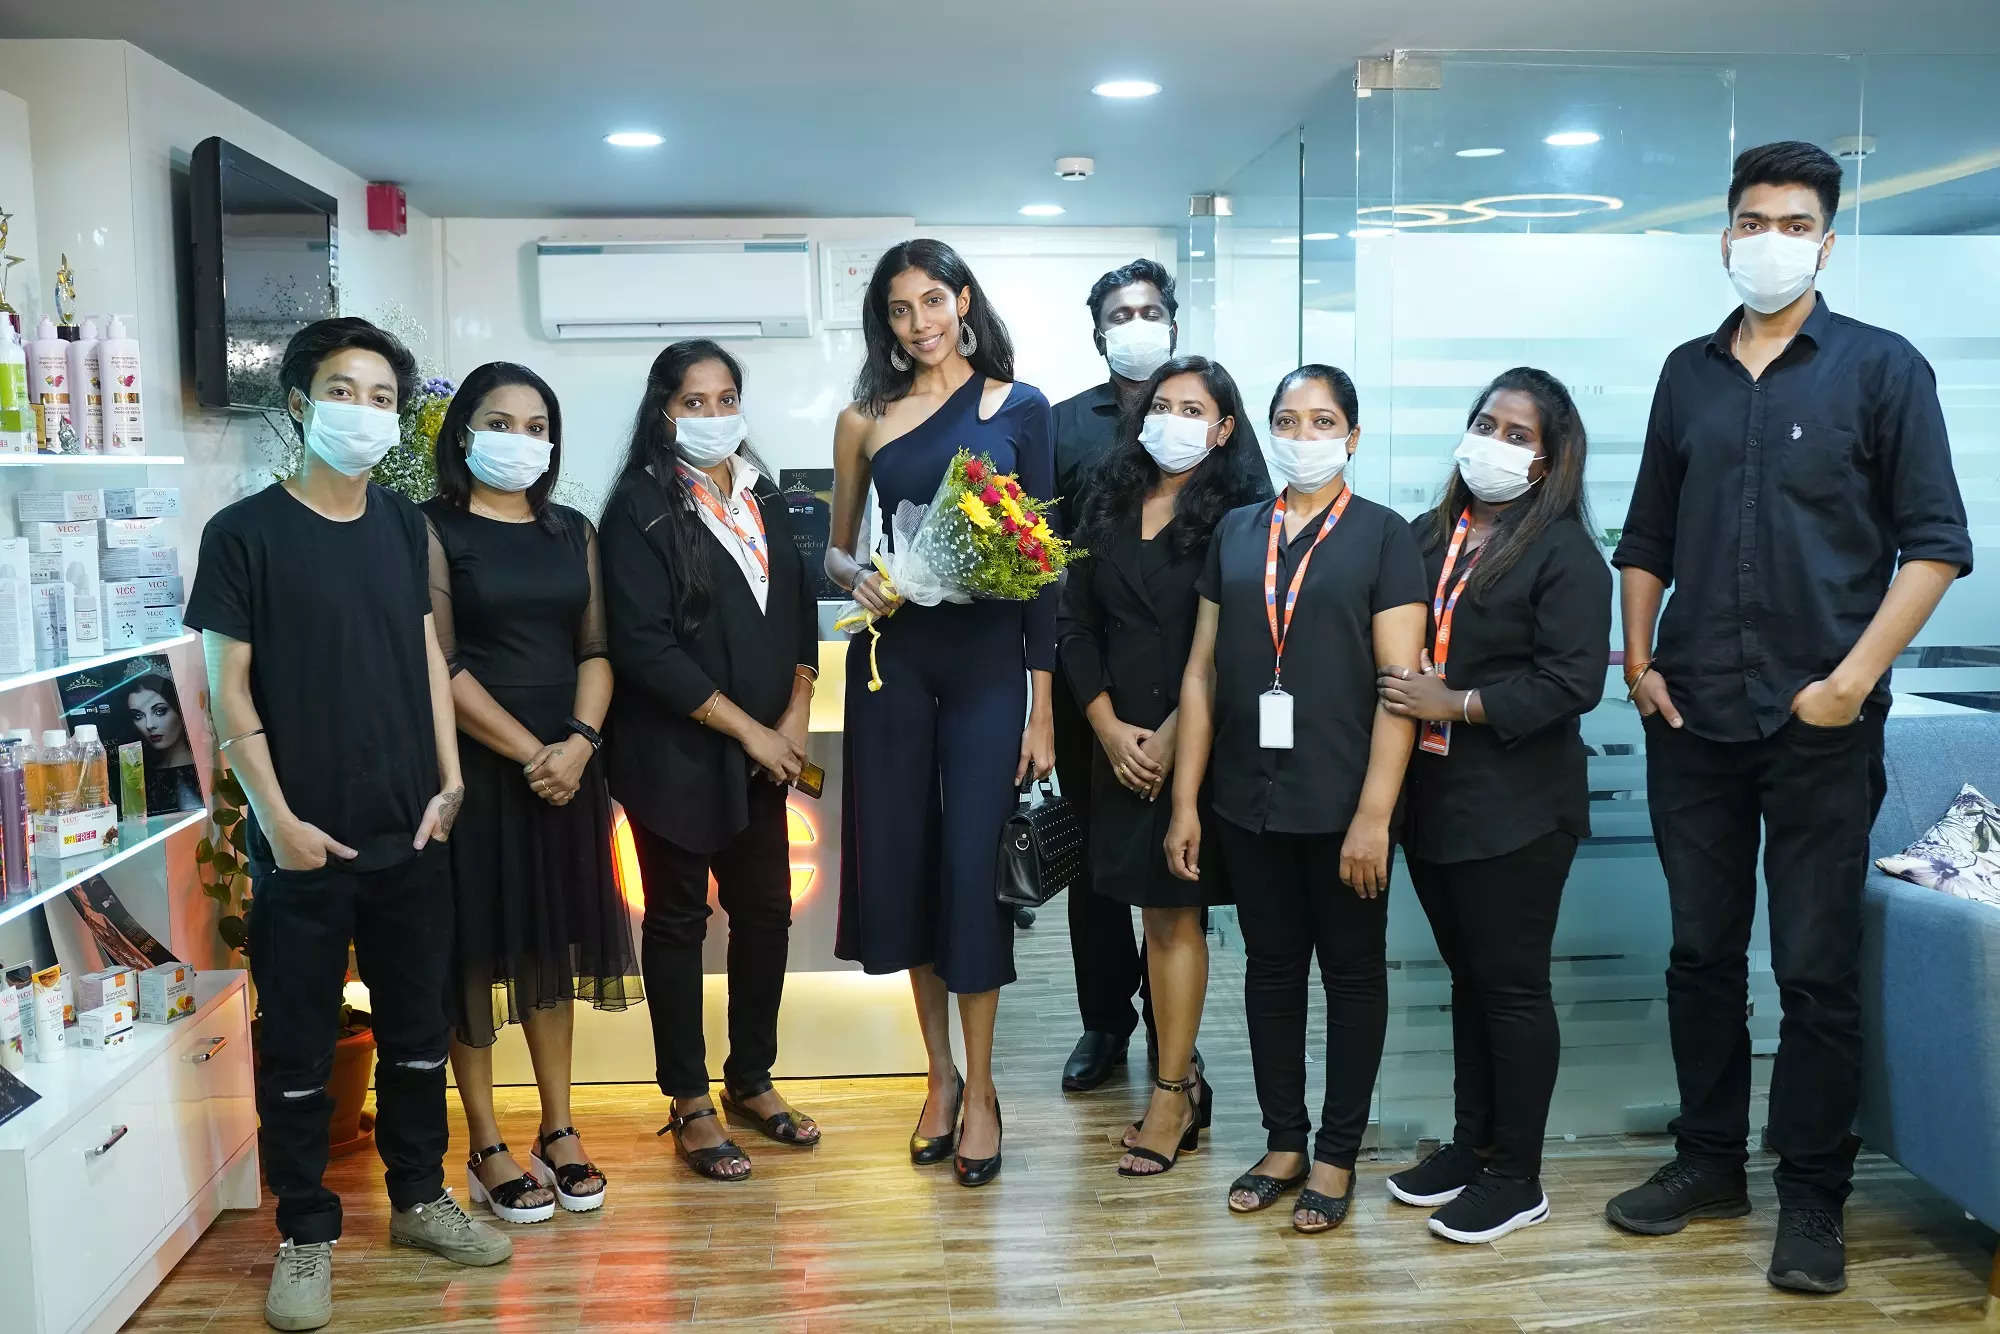 Miss India & VLCC - the leading brand in beauty & wellness